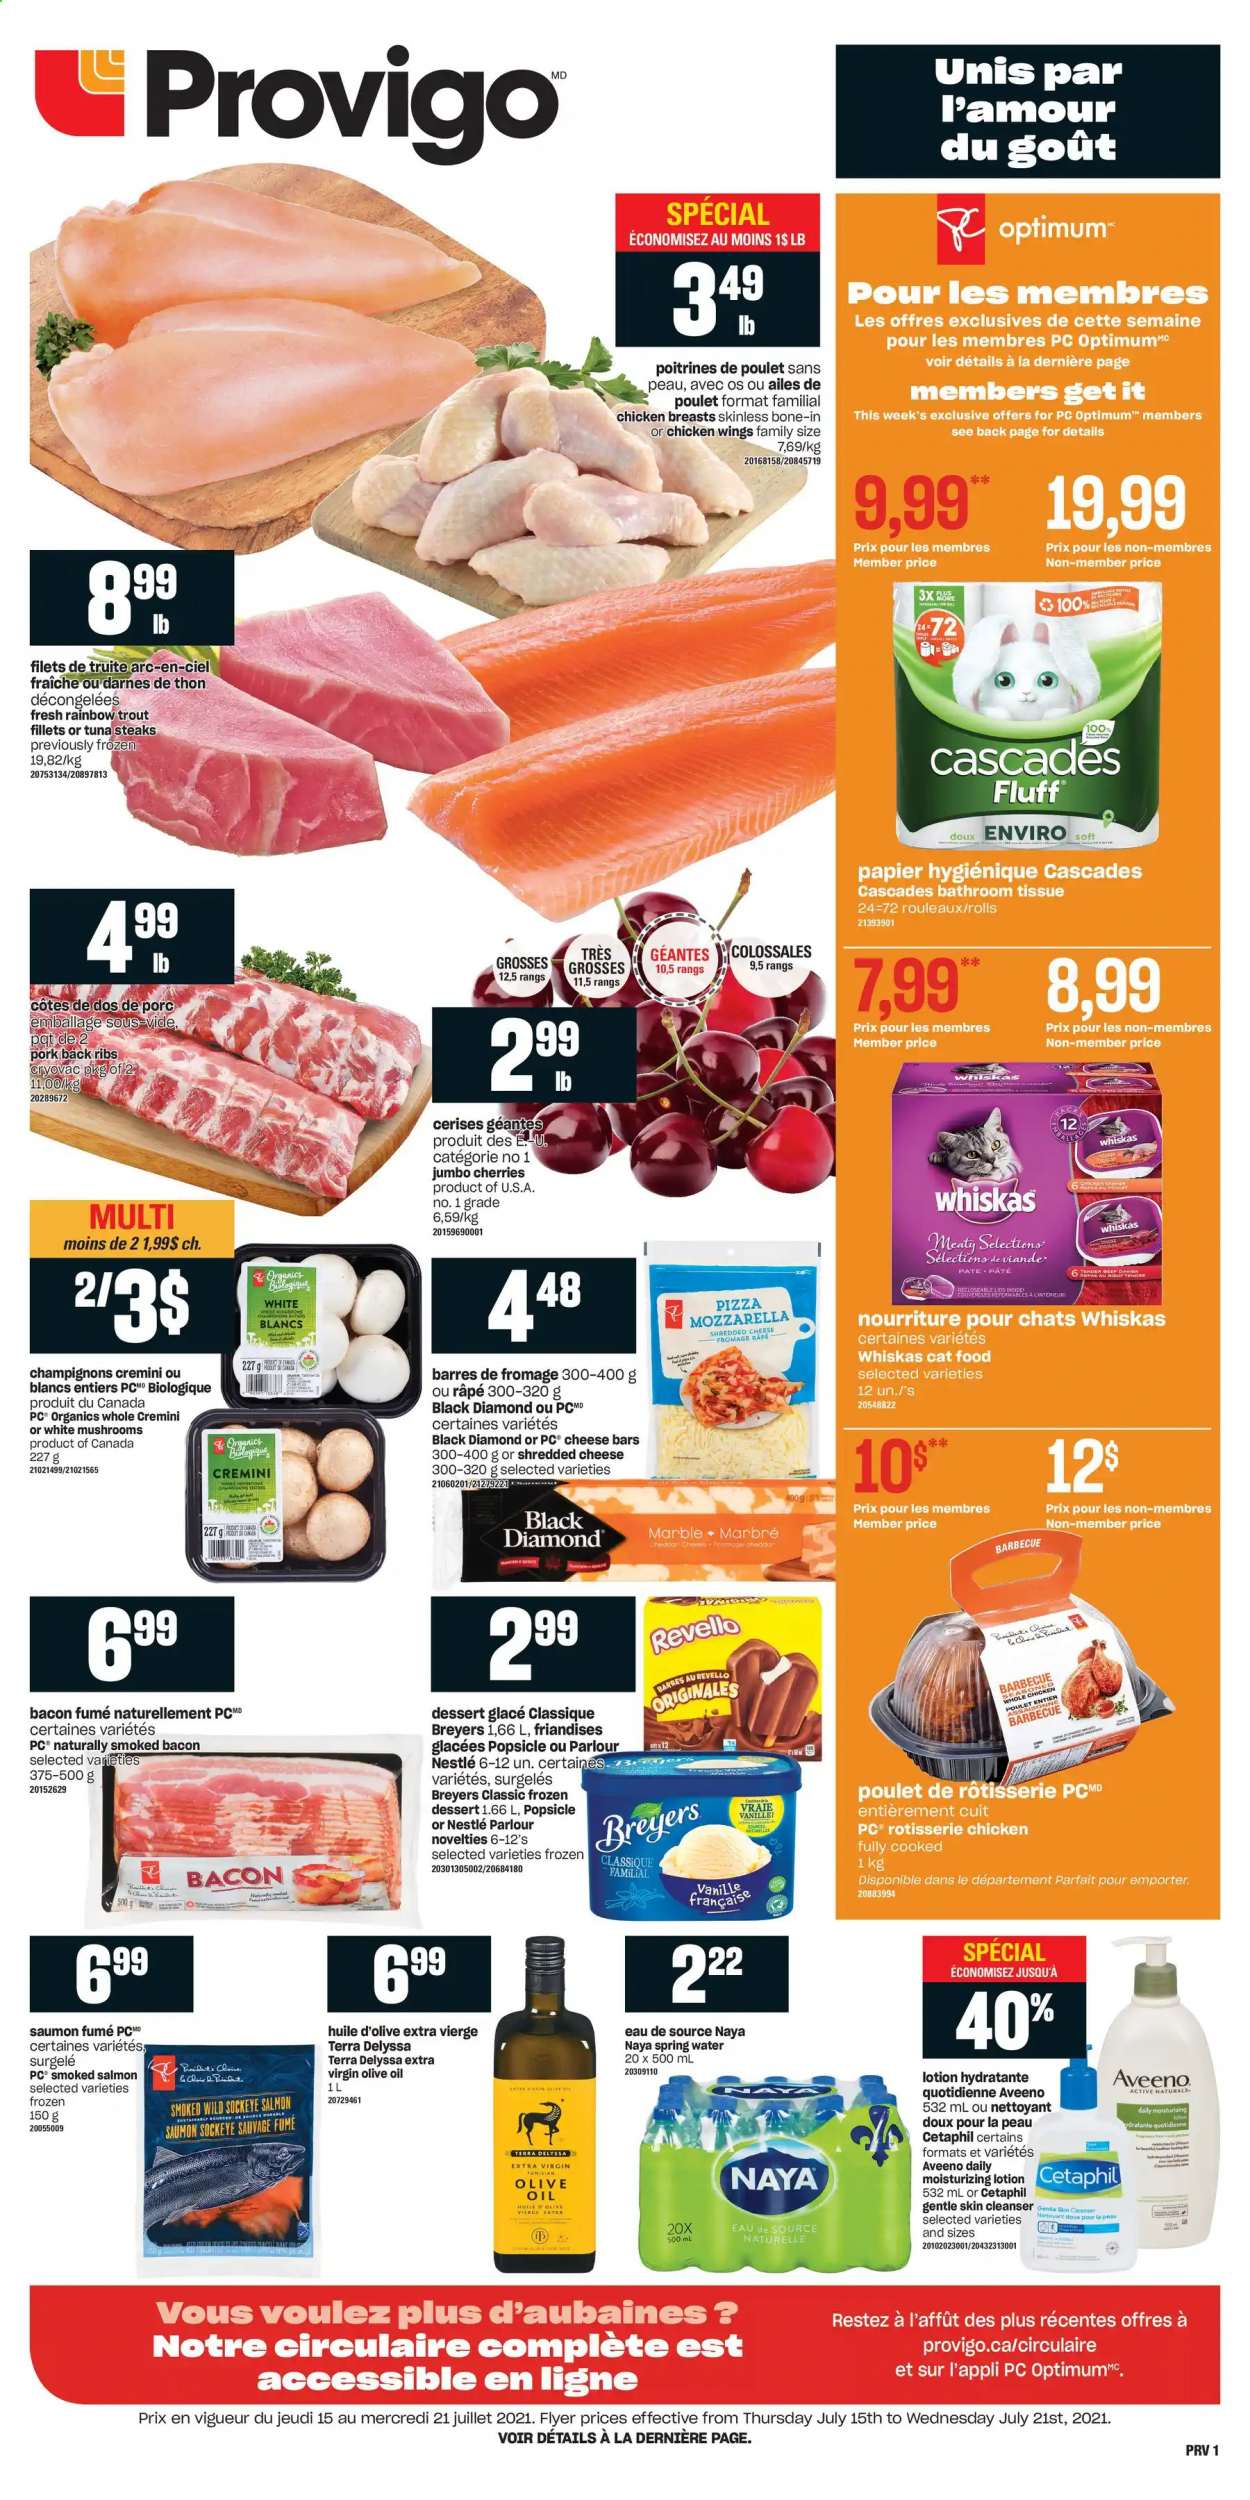 thumbnail - Provigo Flyer - July 15, 2021 - July 21, 2021 - Sales products - Ace, cherries, smoked salmon, trout, pizza, chicken roast, bacon, shredded cheese, cheddar, chicken wings, extra virgin olive oil, olive oil, oil, spring water, chicken breasts, pork meat, pork ribs, pork back ribs, Aveeno, bath tissue, cleanser, body lotion, Nestlé, steak. Page 1.